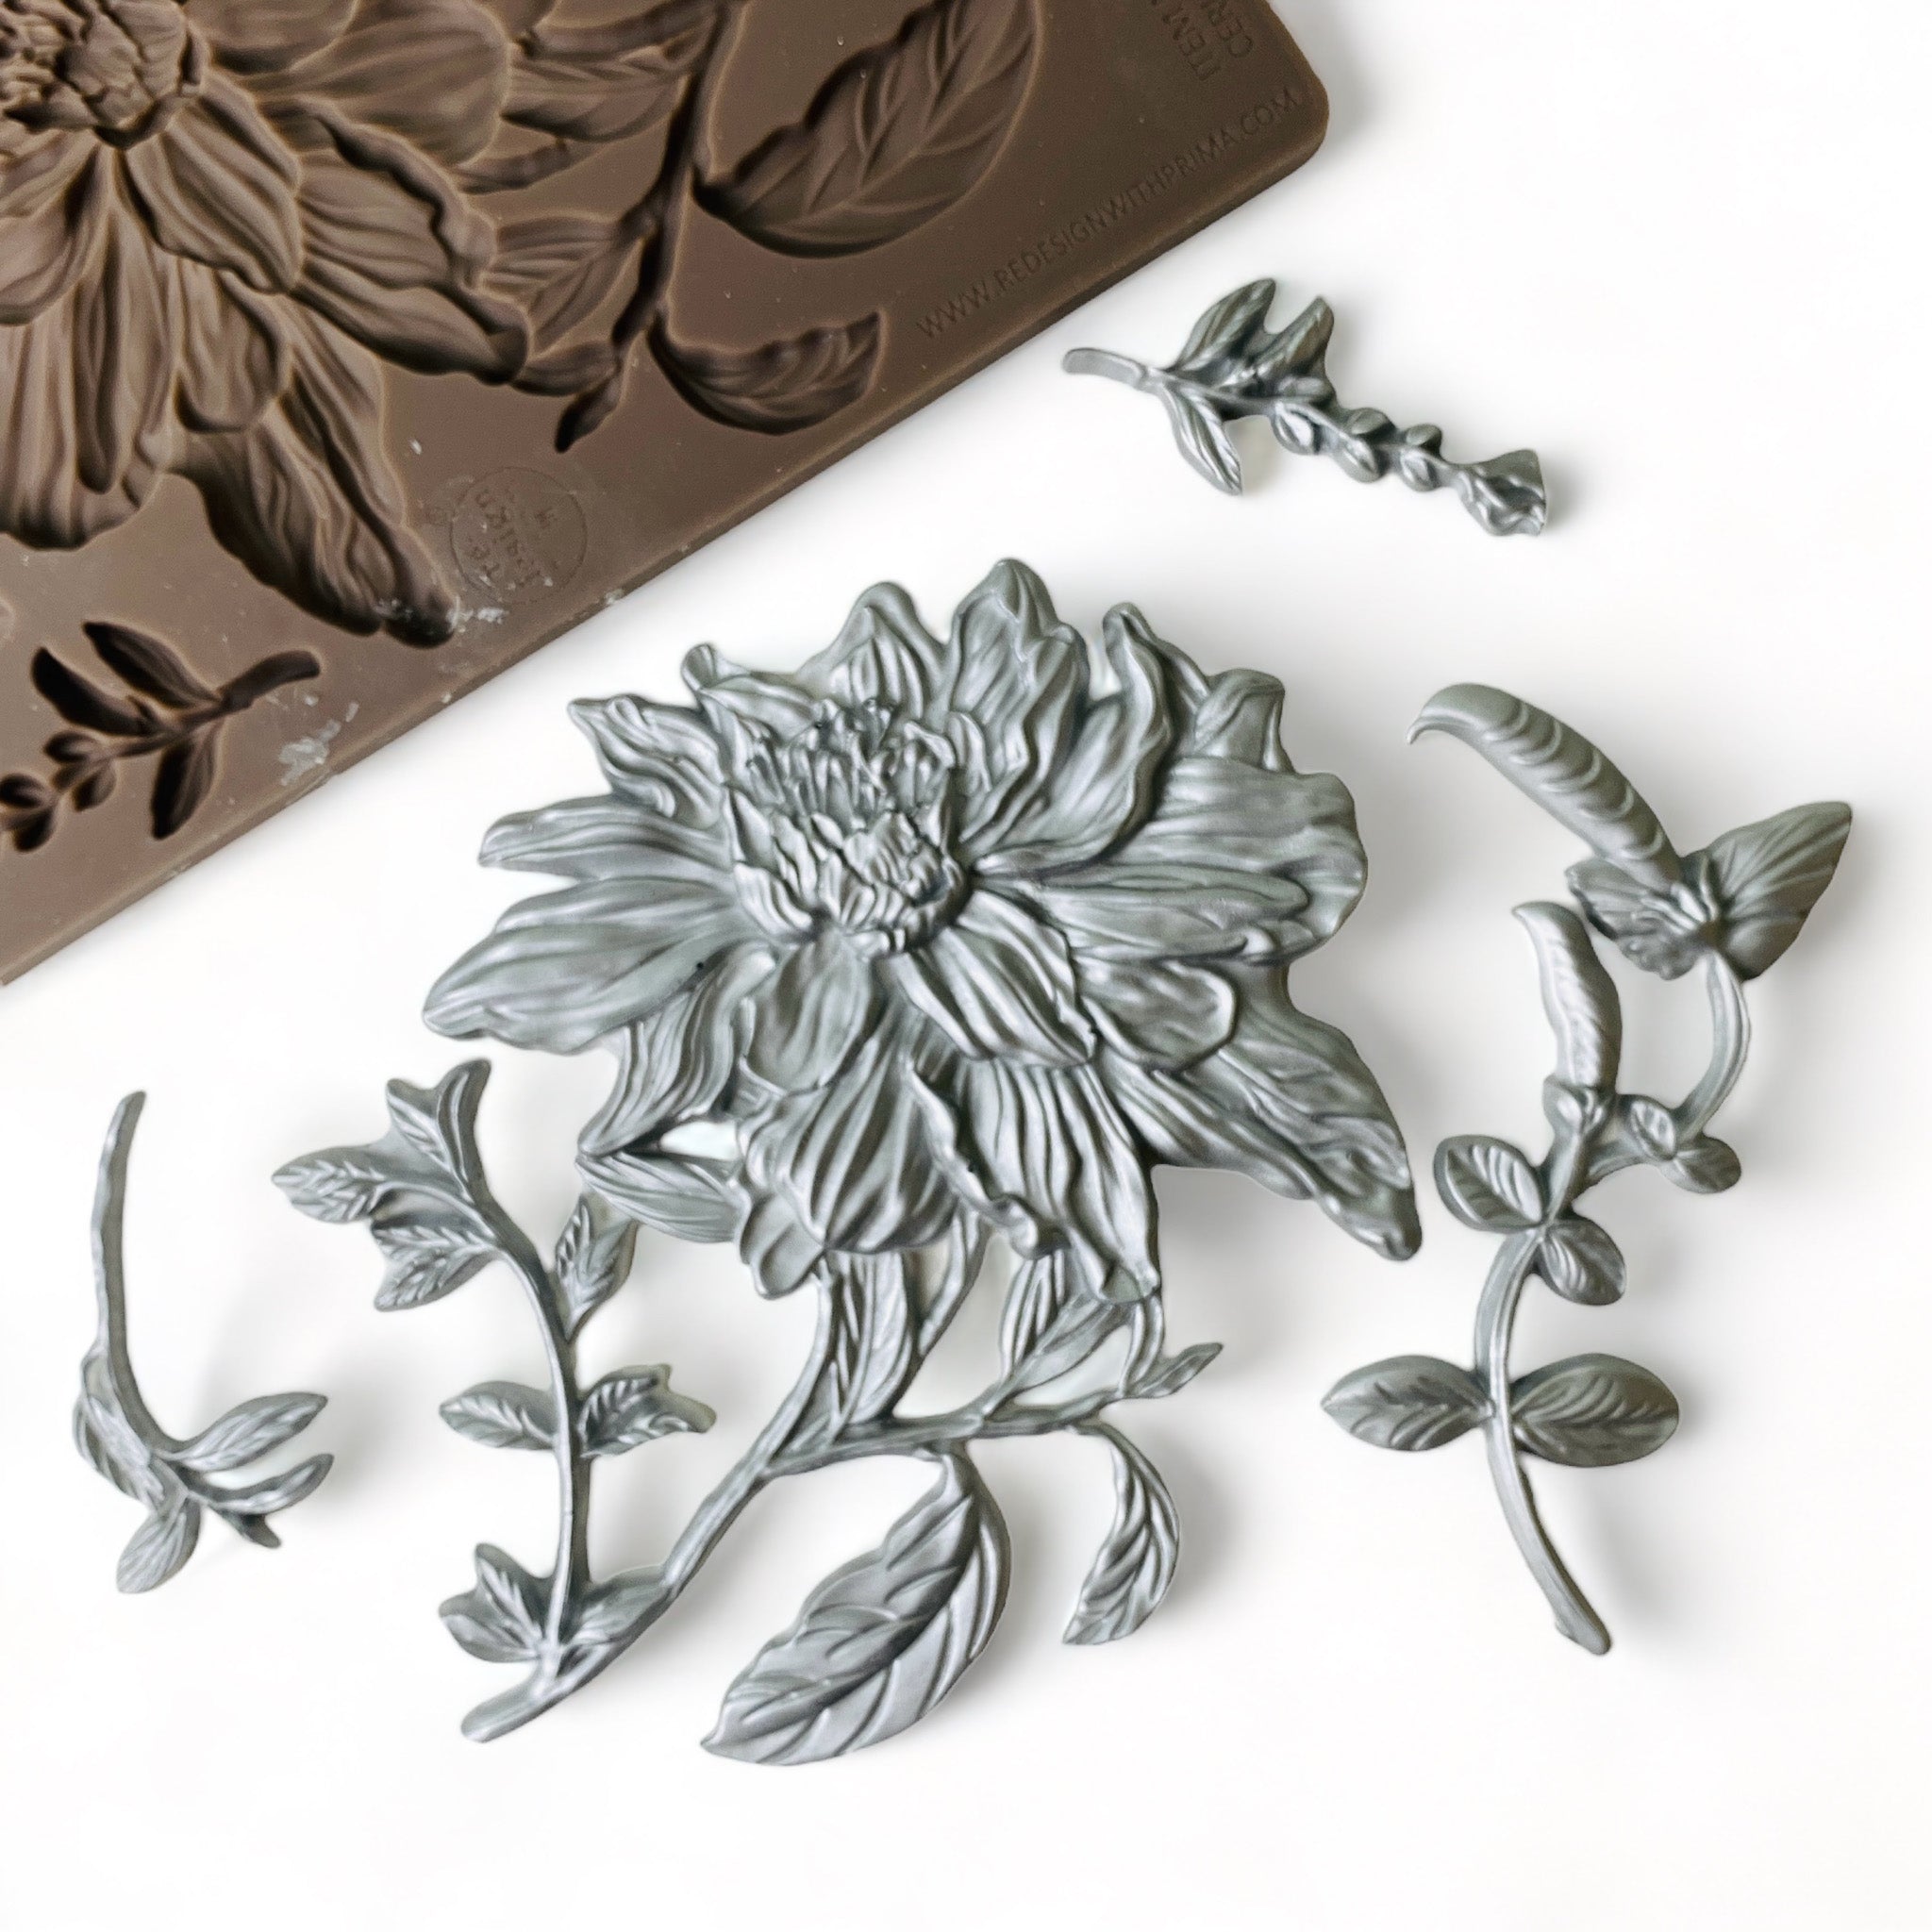 A brown silicone mold and silver-colored castings of a large flower bloom with foliage are against a white background.